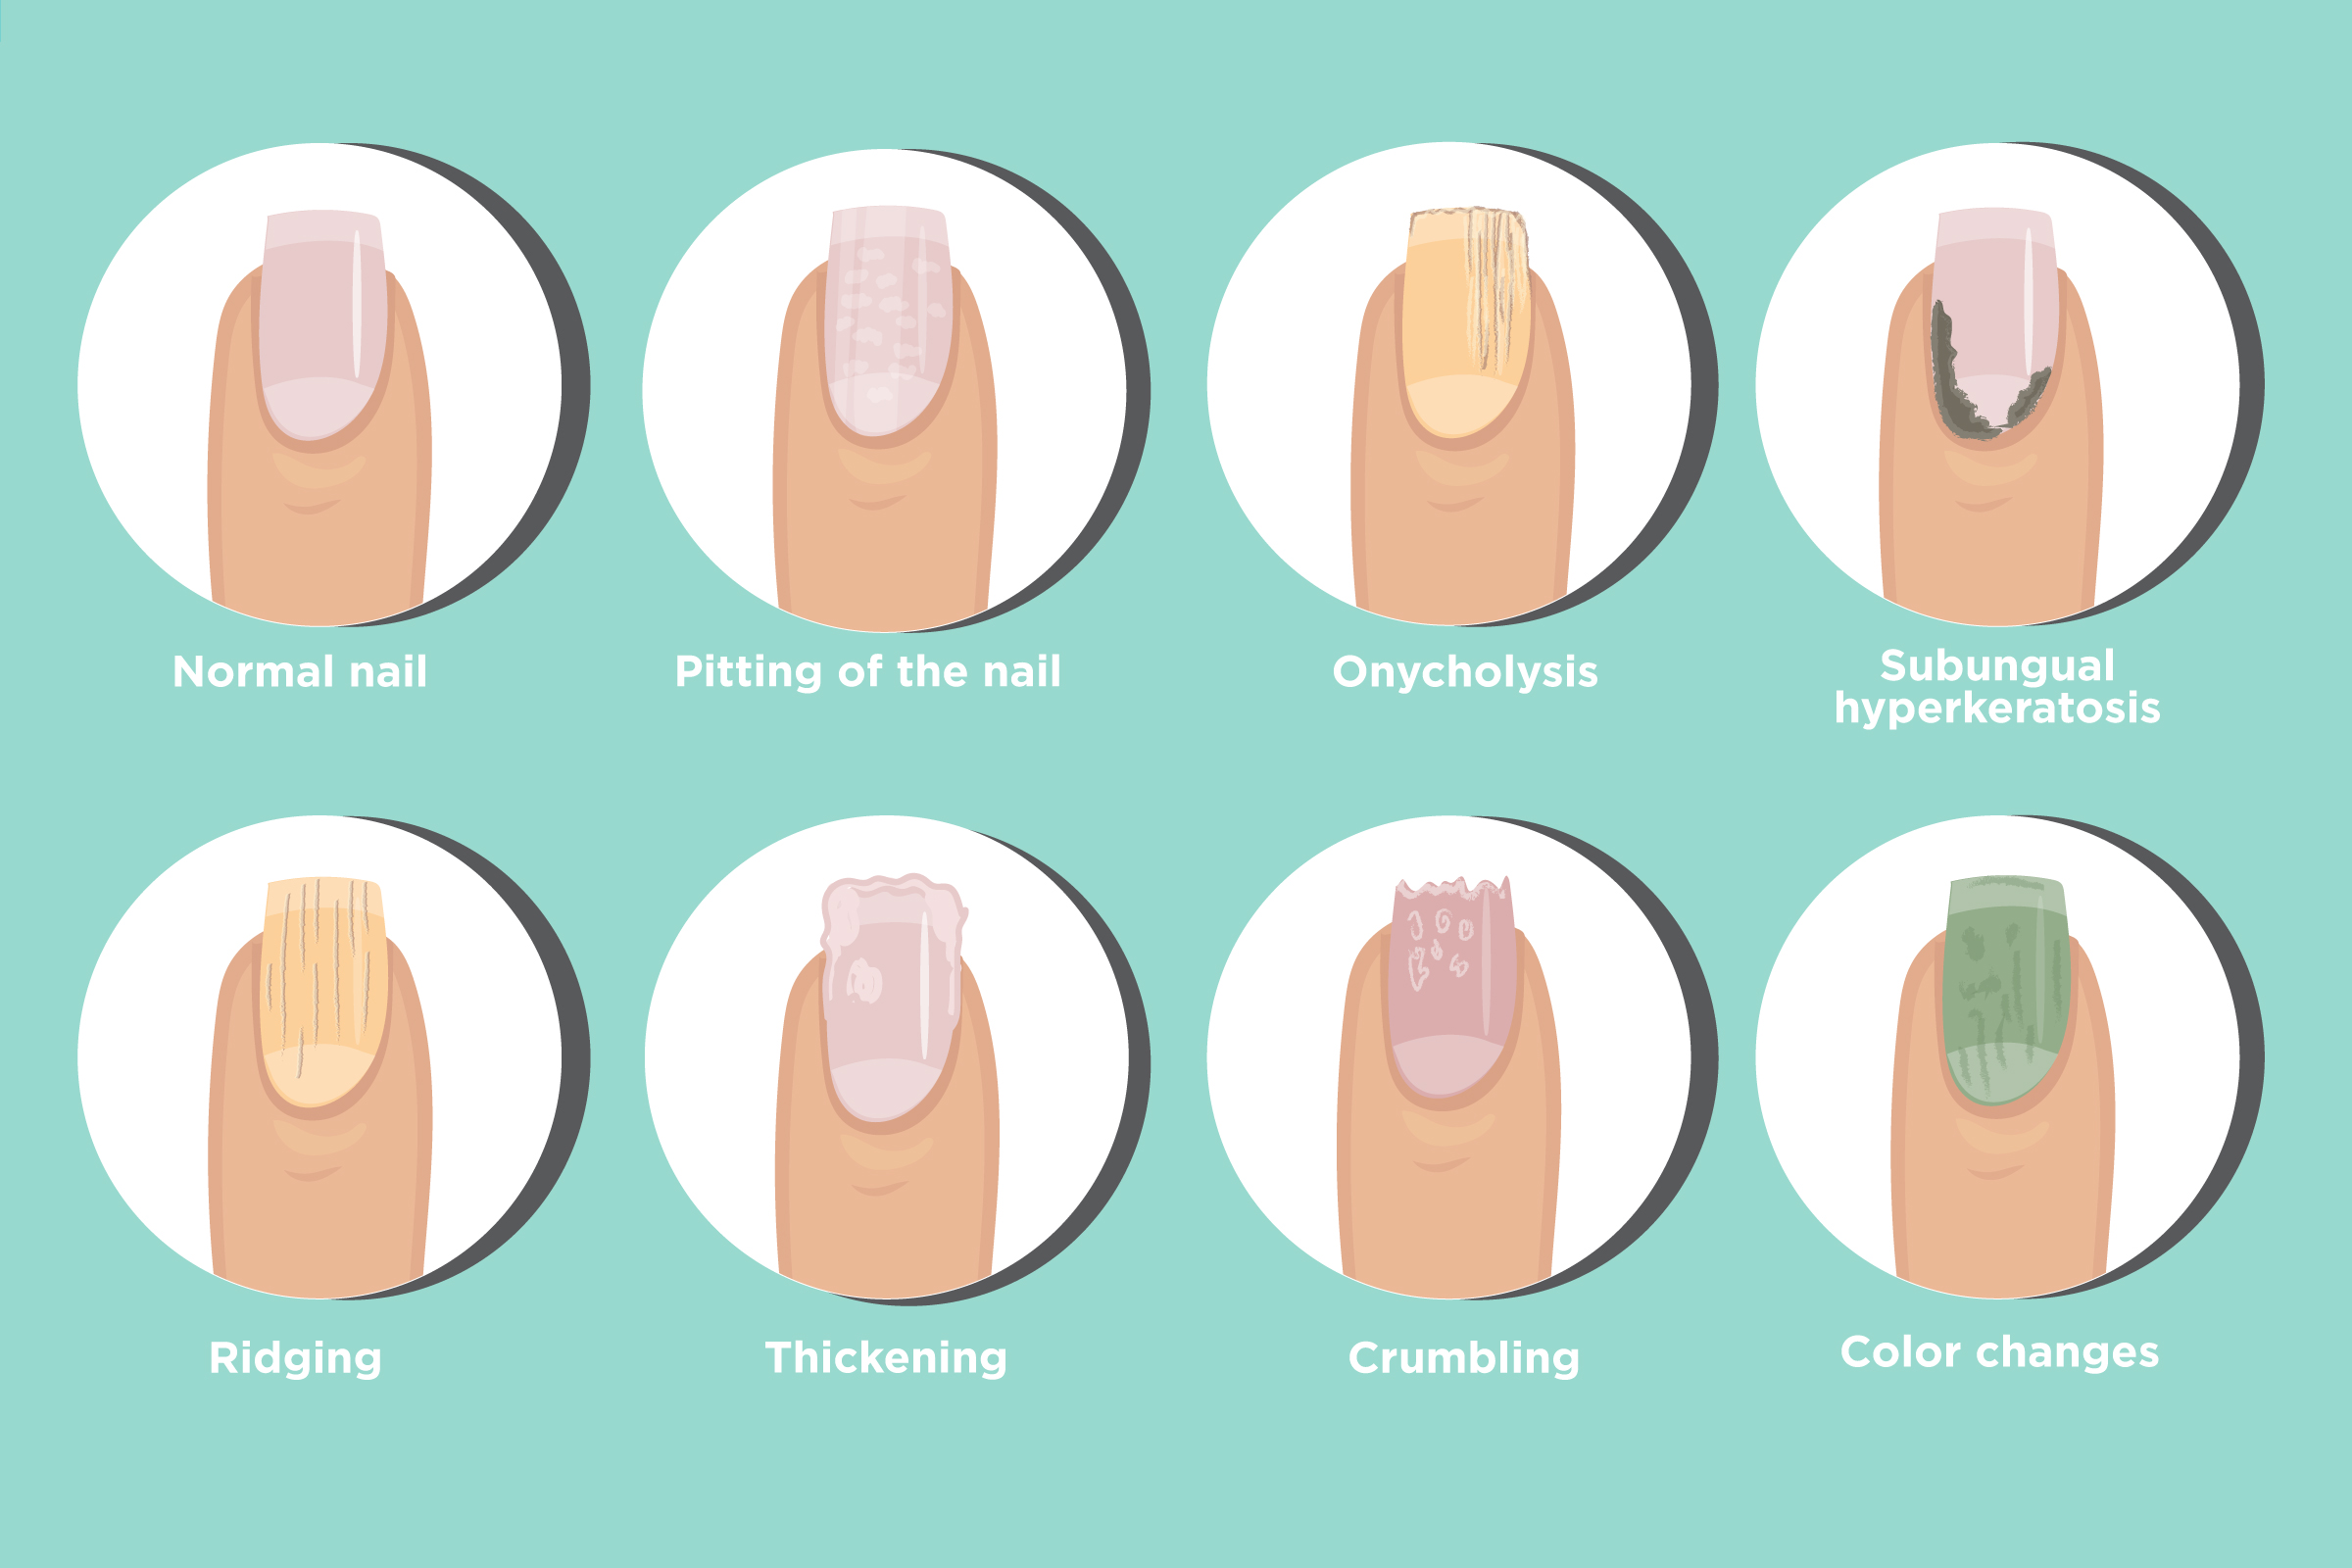 Changes in Nail Bed Color: When to See a Doctor - wide 4